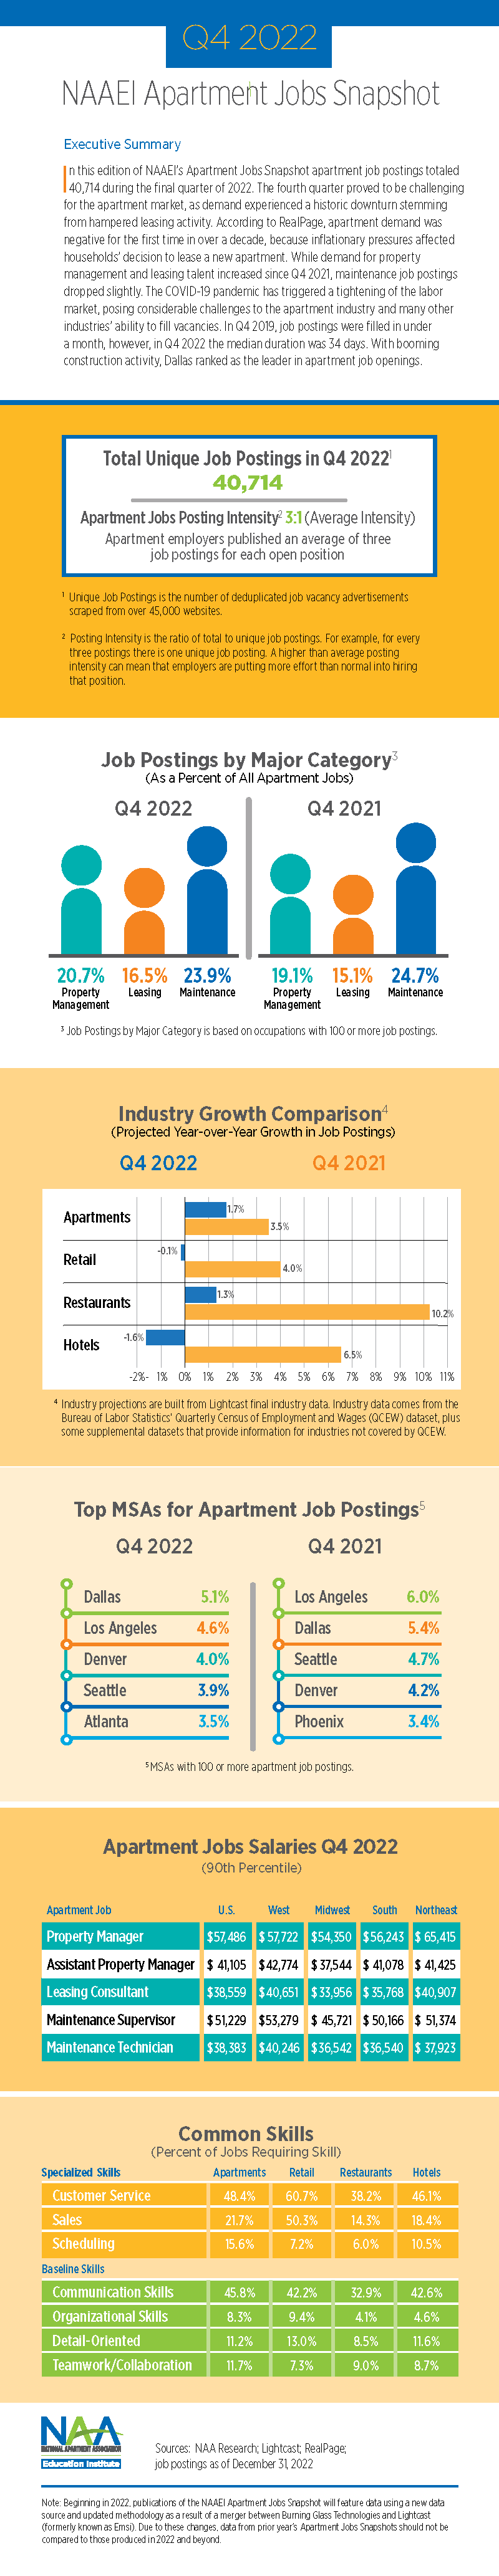 infographic image of apartment jobs snapshot